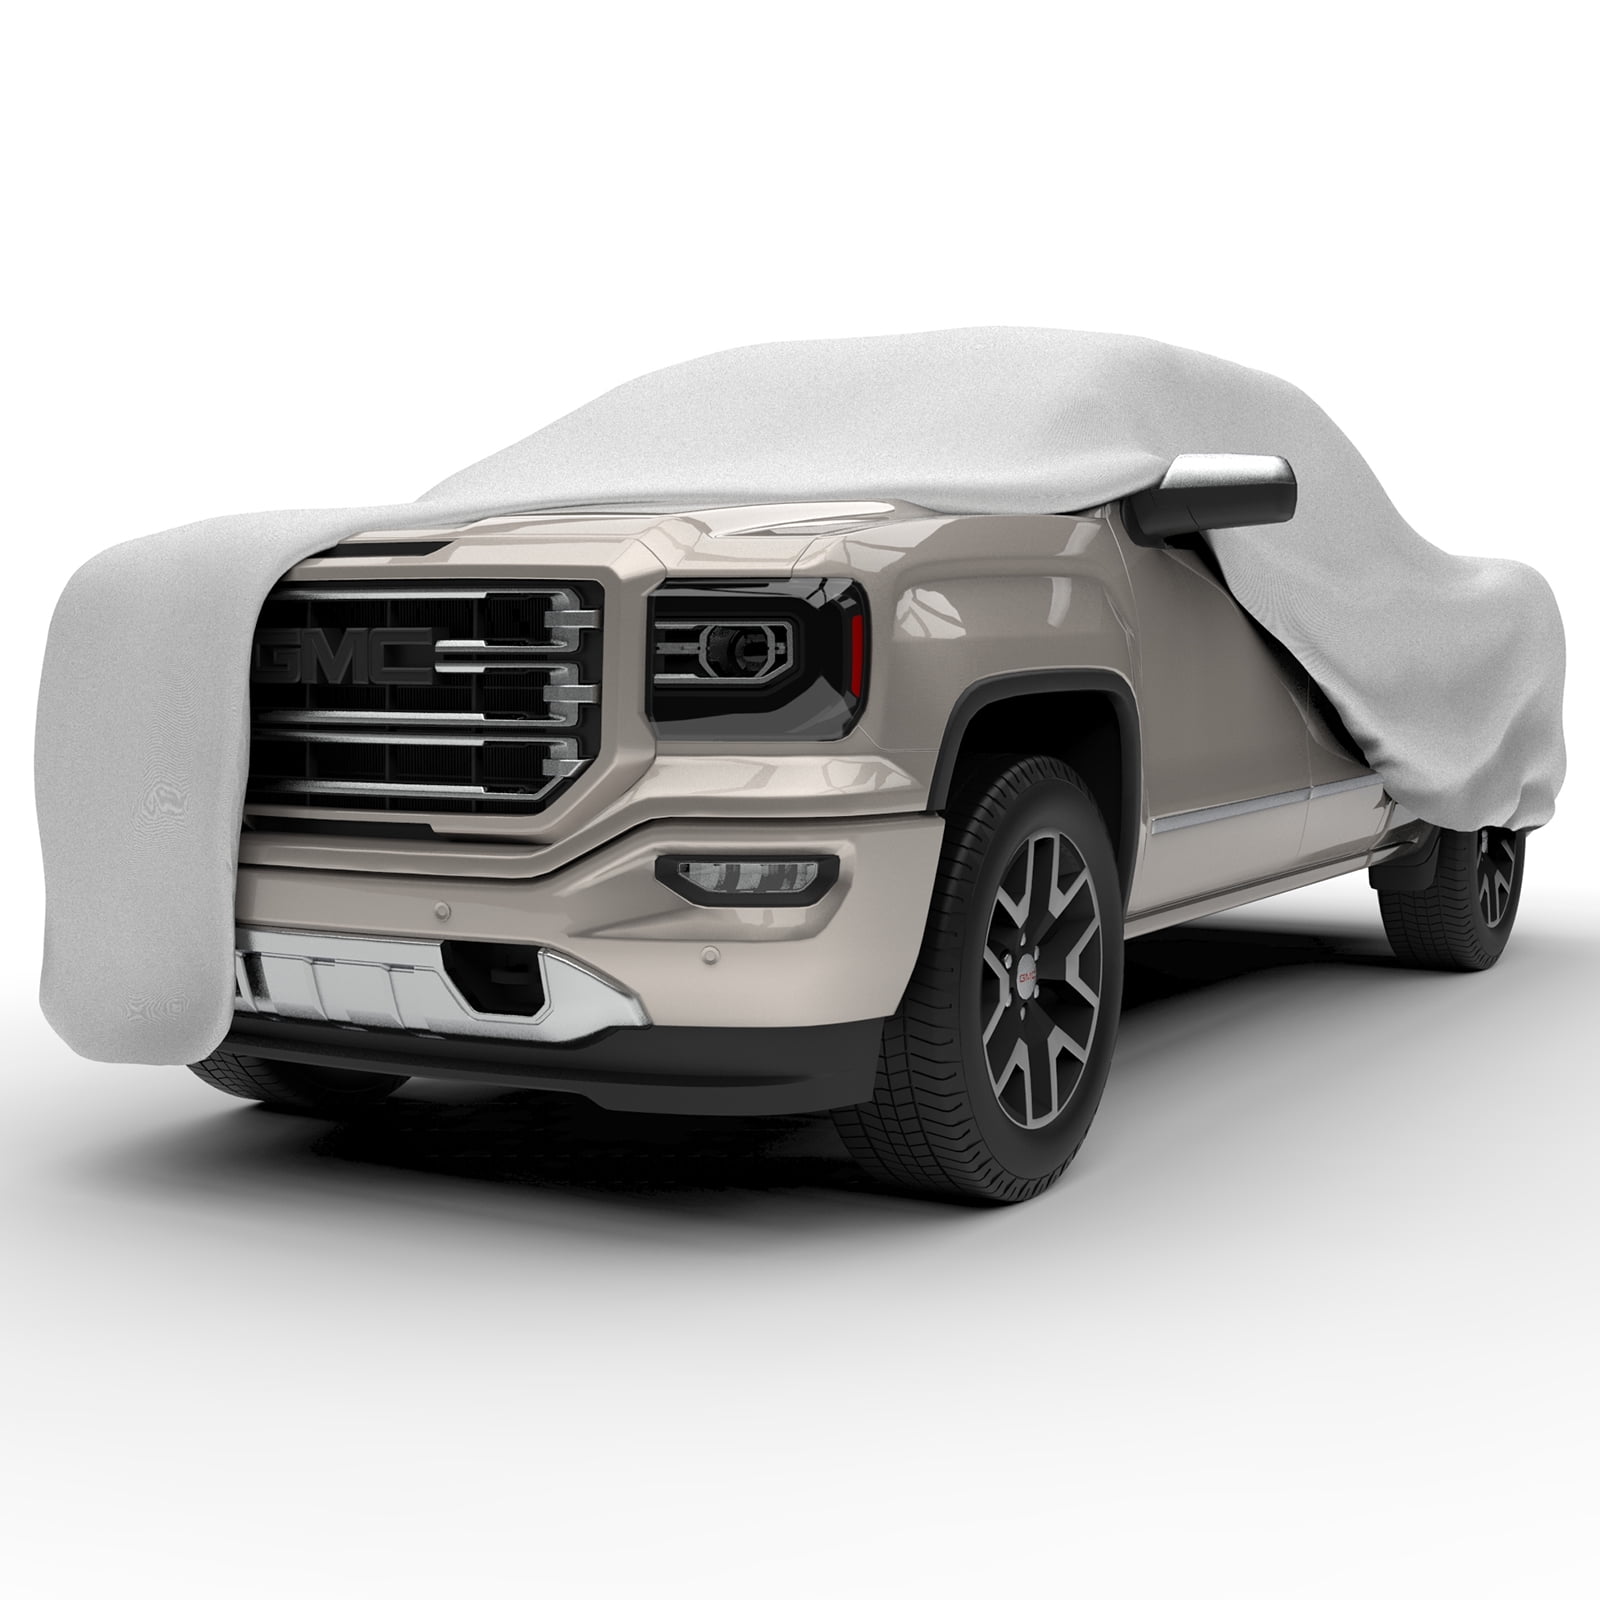 Budge Ultra Cover, Standard UV and Dirt Protection for Trucks, Multiple Sizes